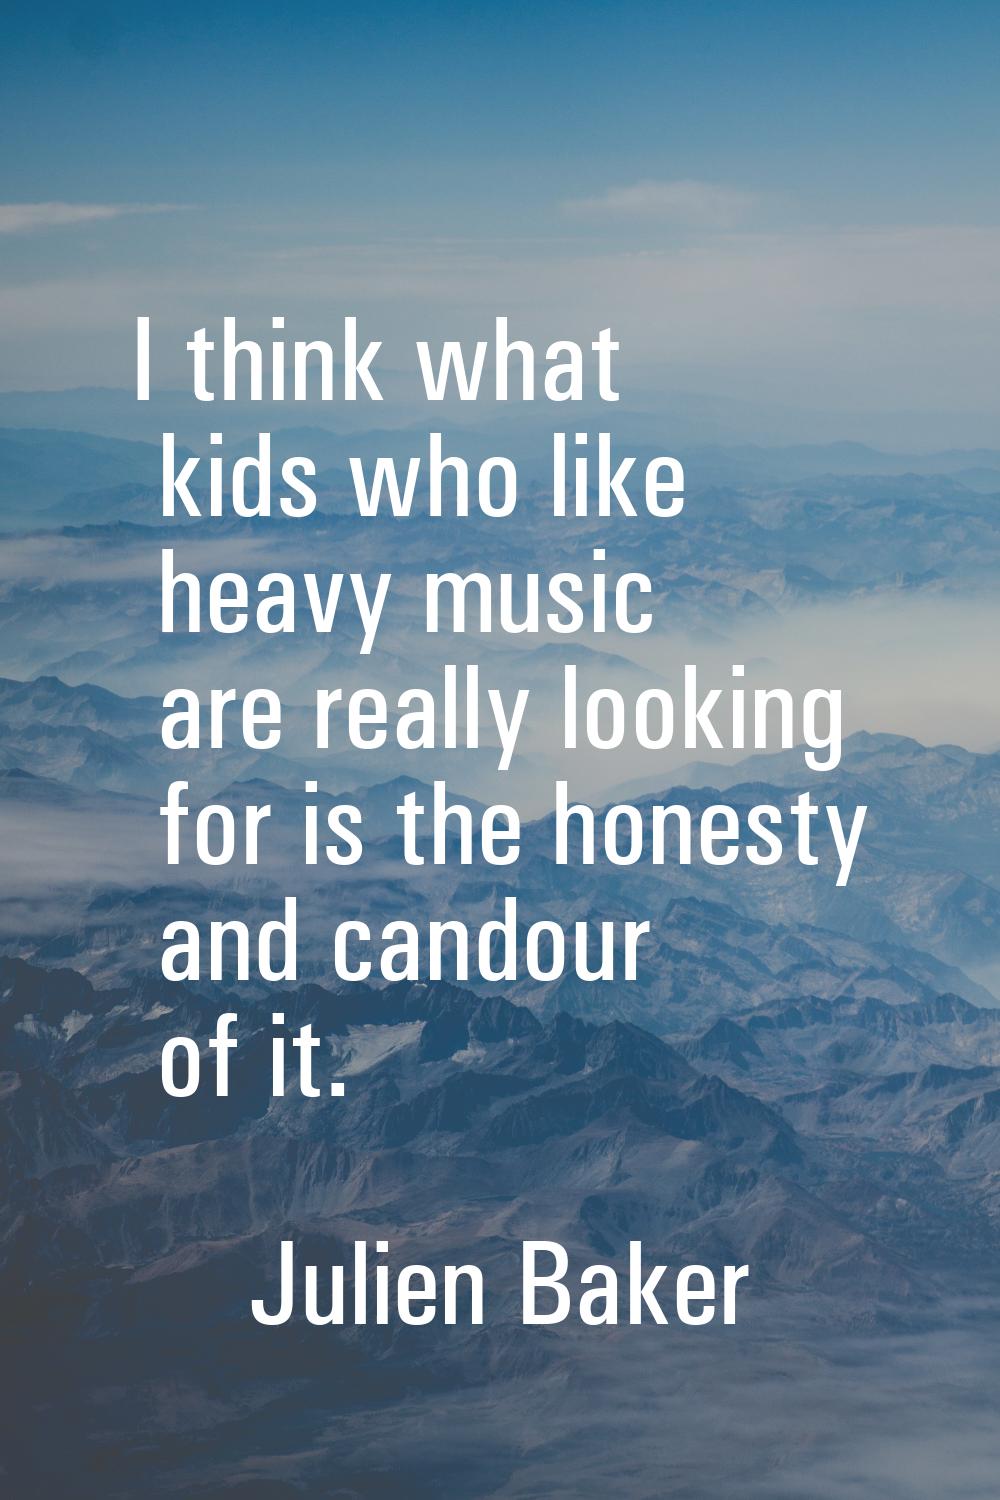 I think what kids who like heavy music are really looking for is the honesty and candour of it.